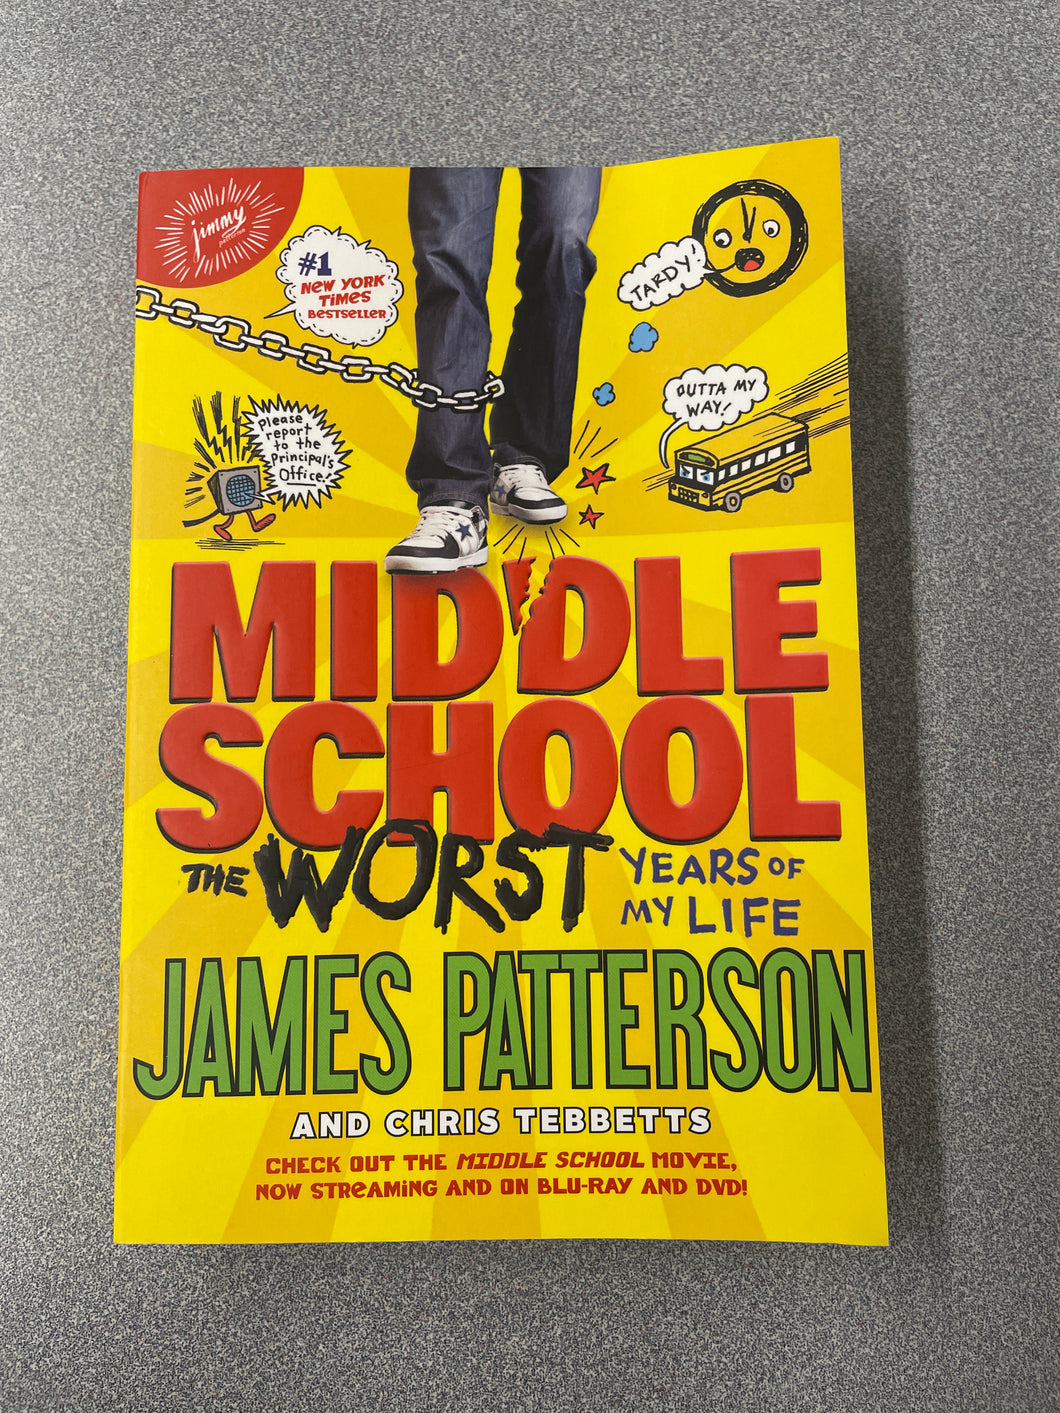 Patterson, James and Chris Tebbetts, Middle School: the Worst Years of My Life [2011] YF 2/24